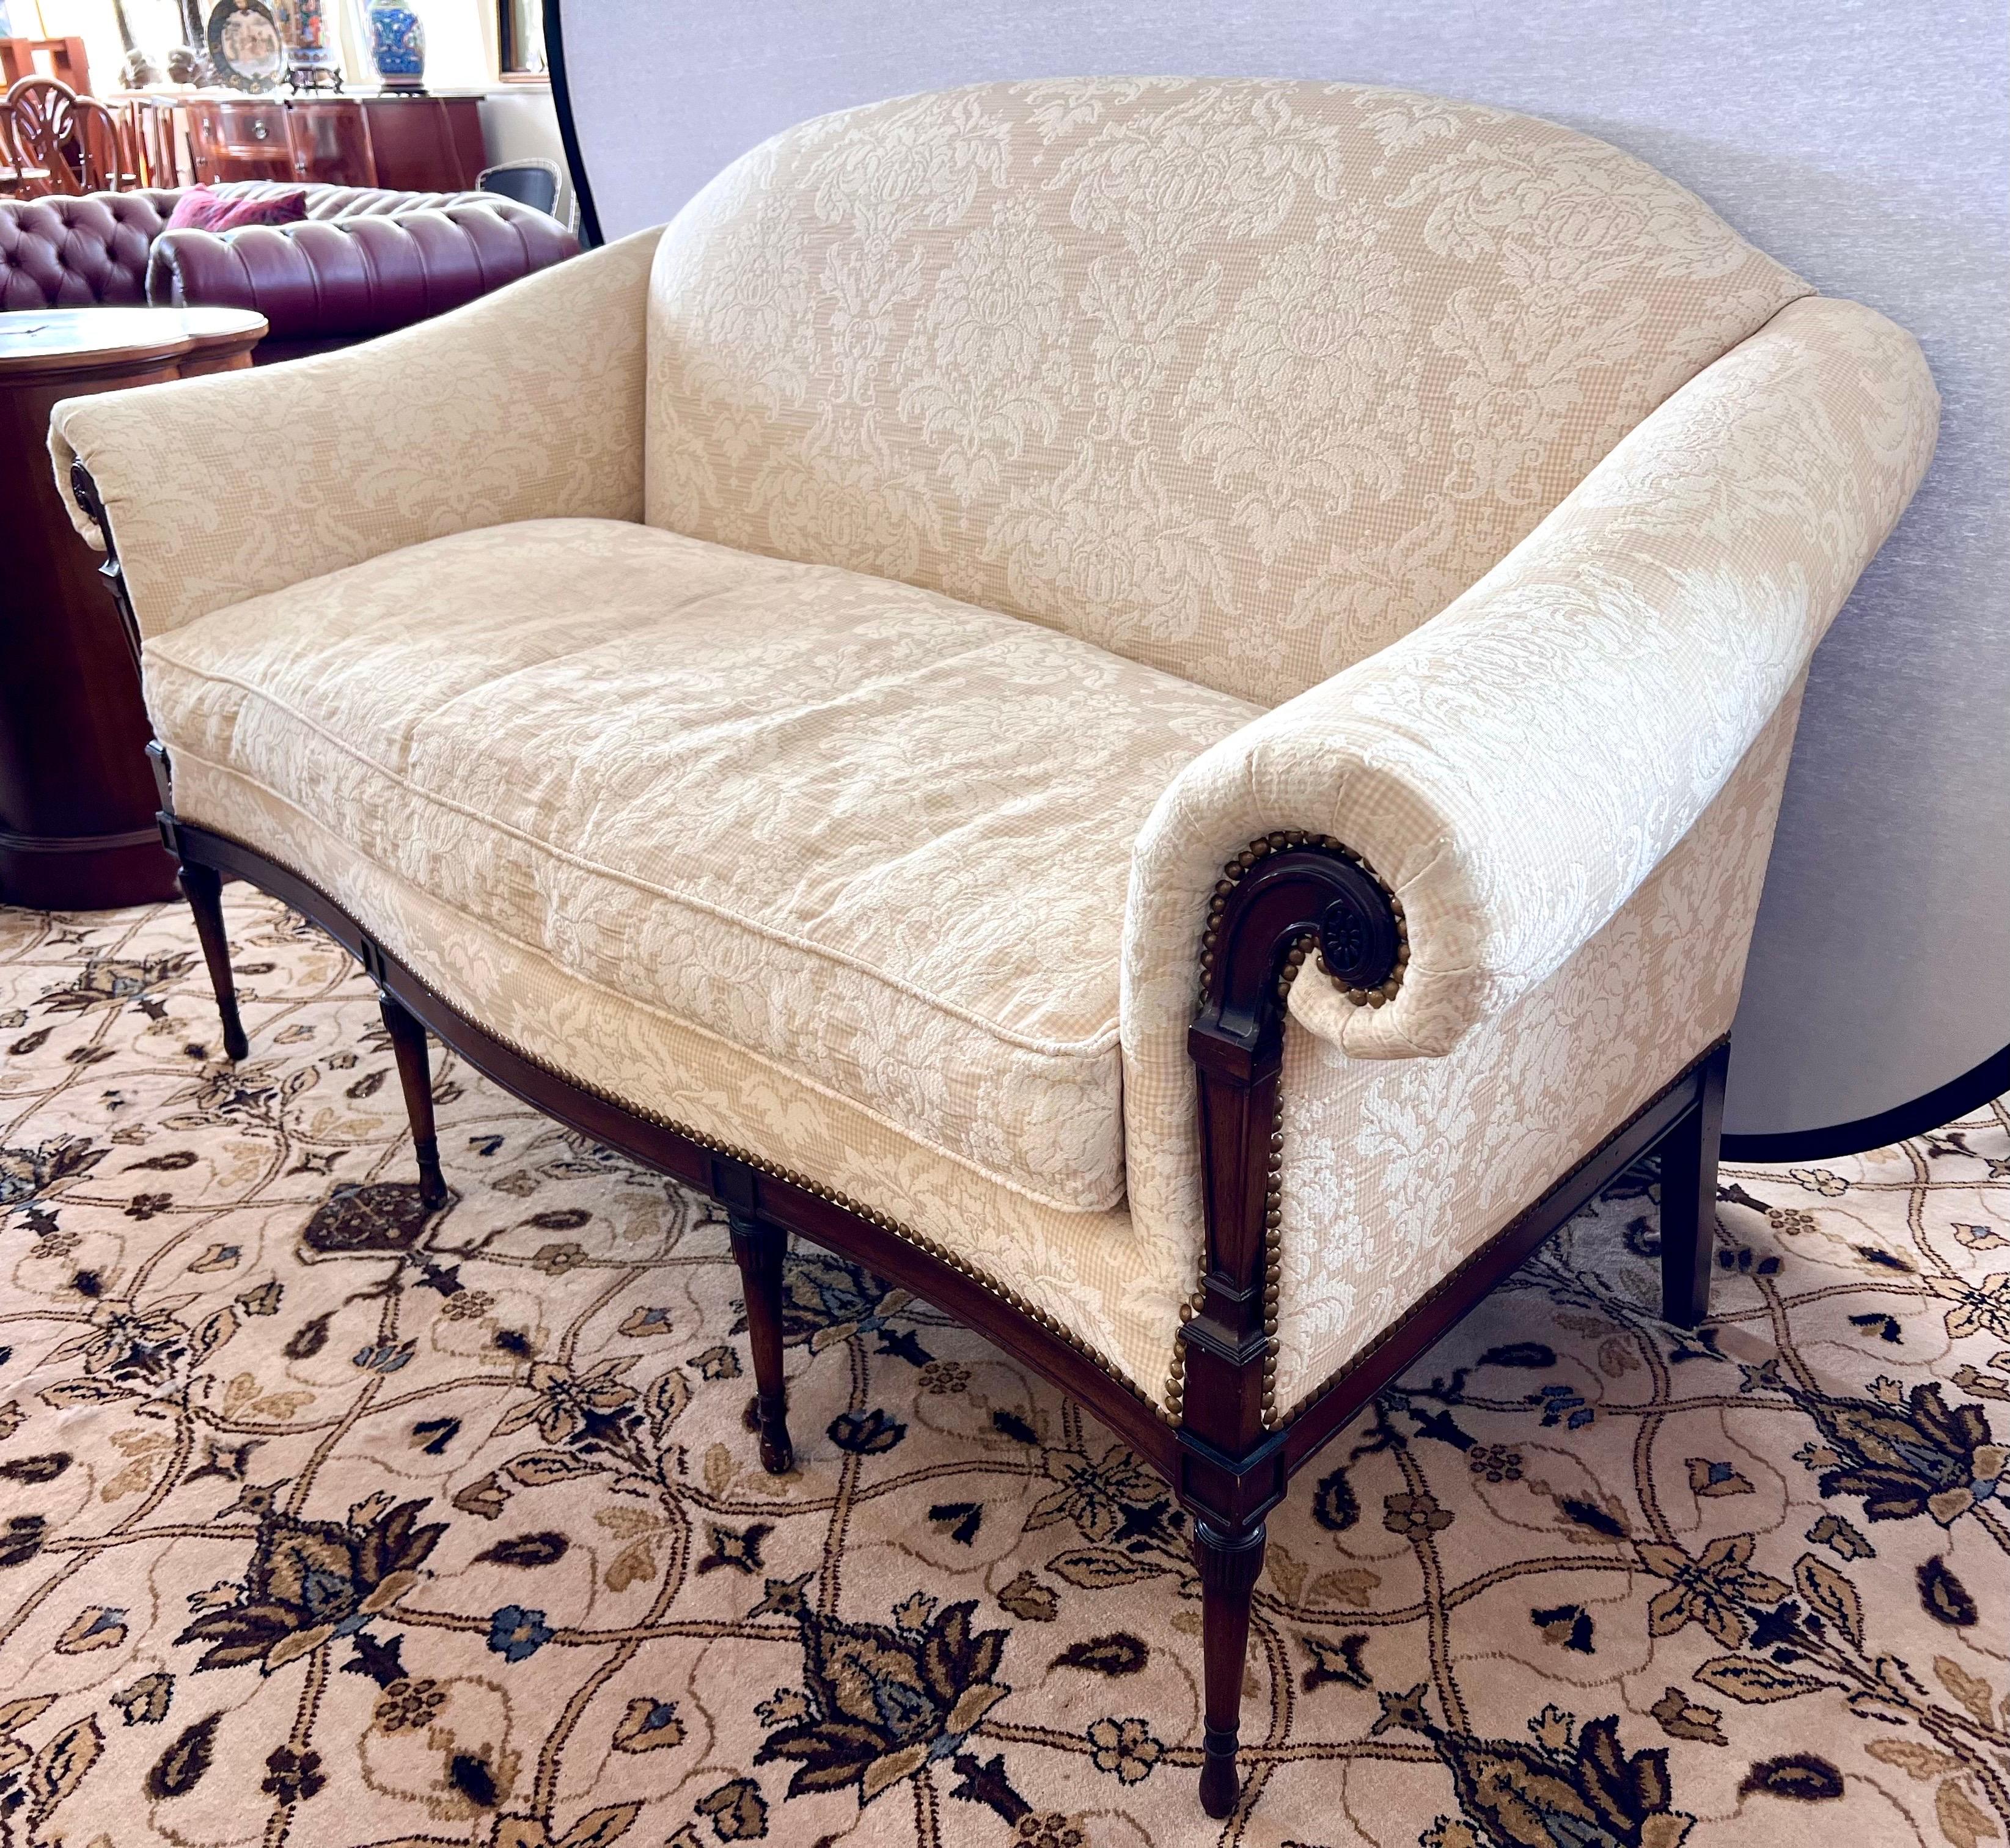 Exquisite E.J. Victor large settee with rare and luxurous Cowton & Tout upholstery.  Great neutral color scheme and so elegant.